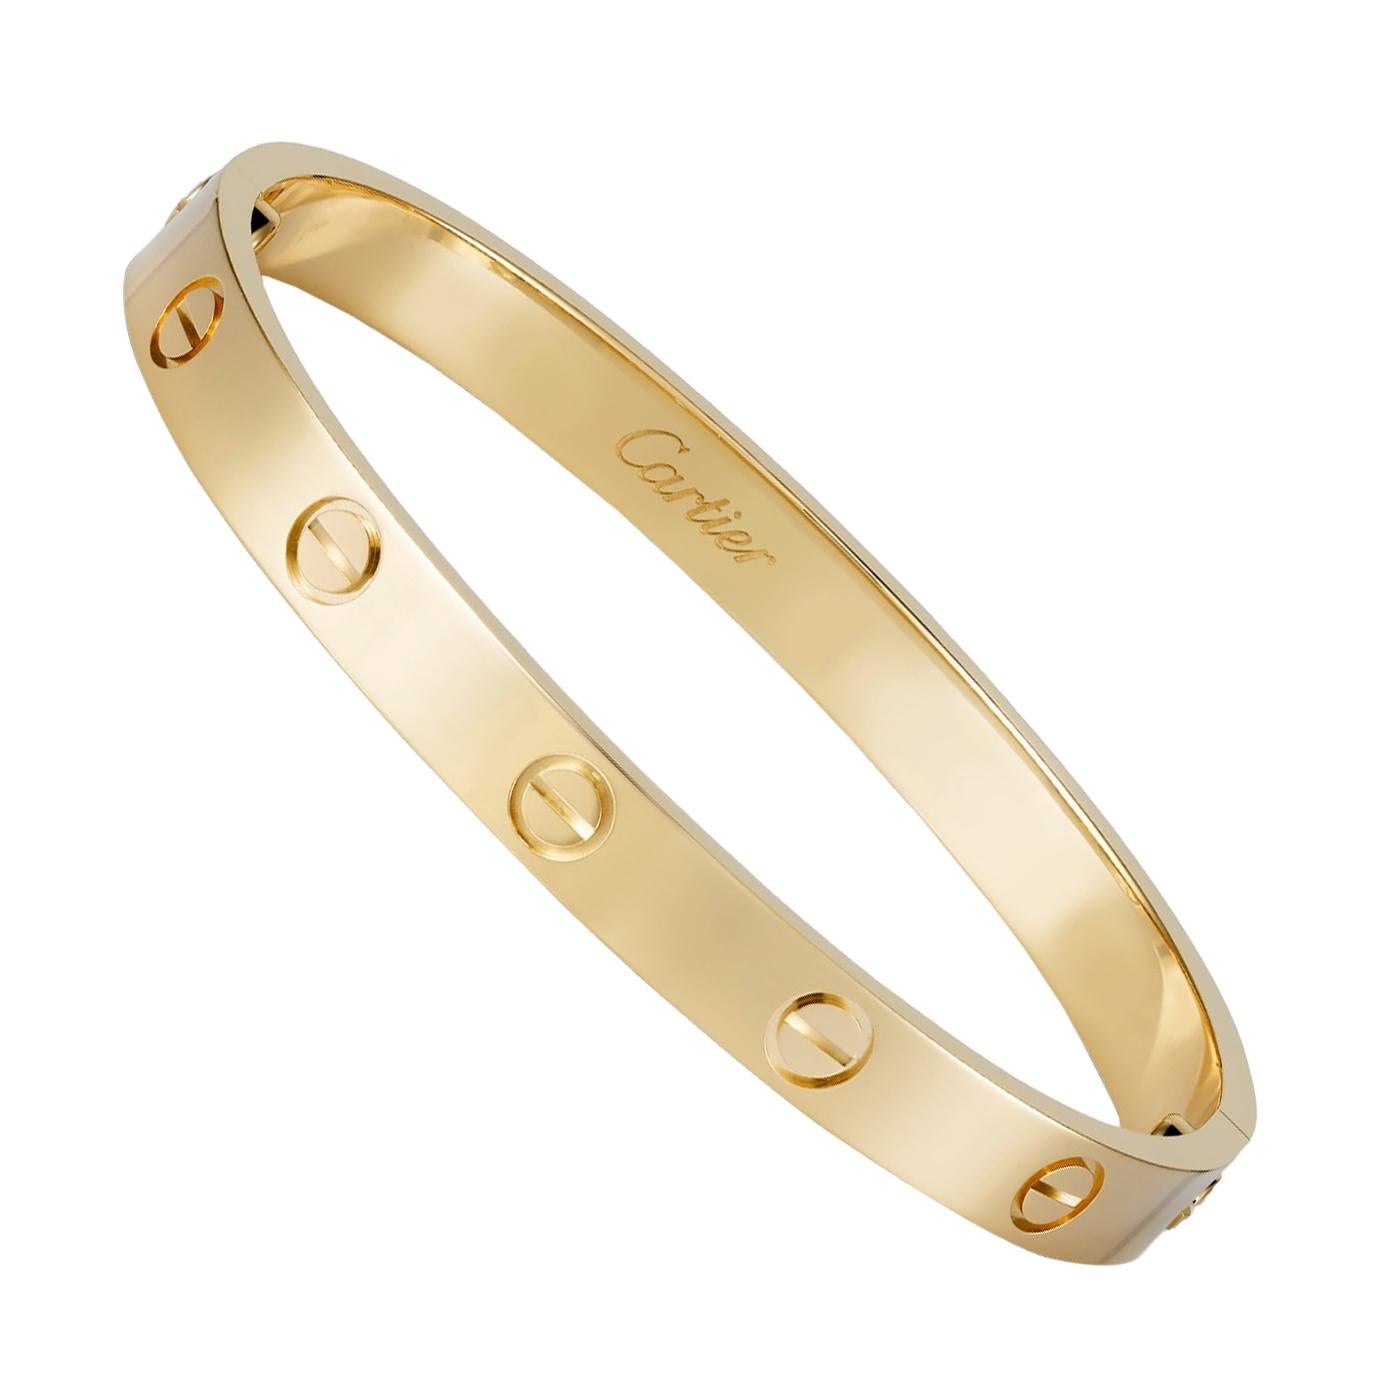 Cartier Love Bracelet 18K Yellow Gold Size 19 With Screwdriver Bangle